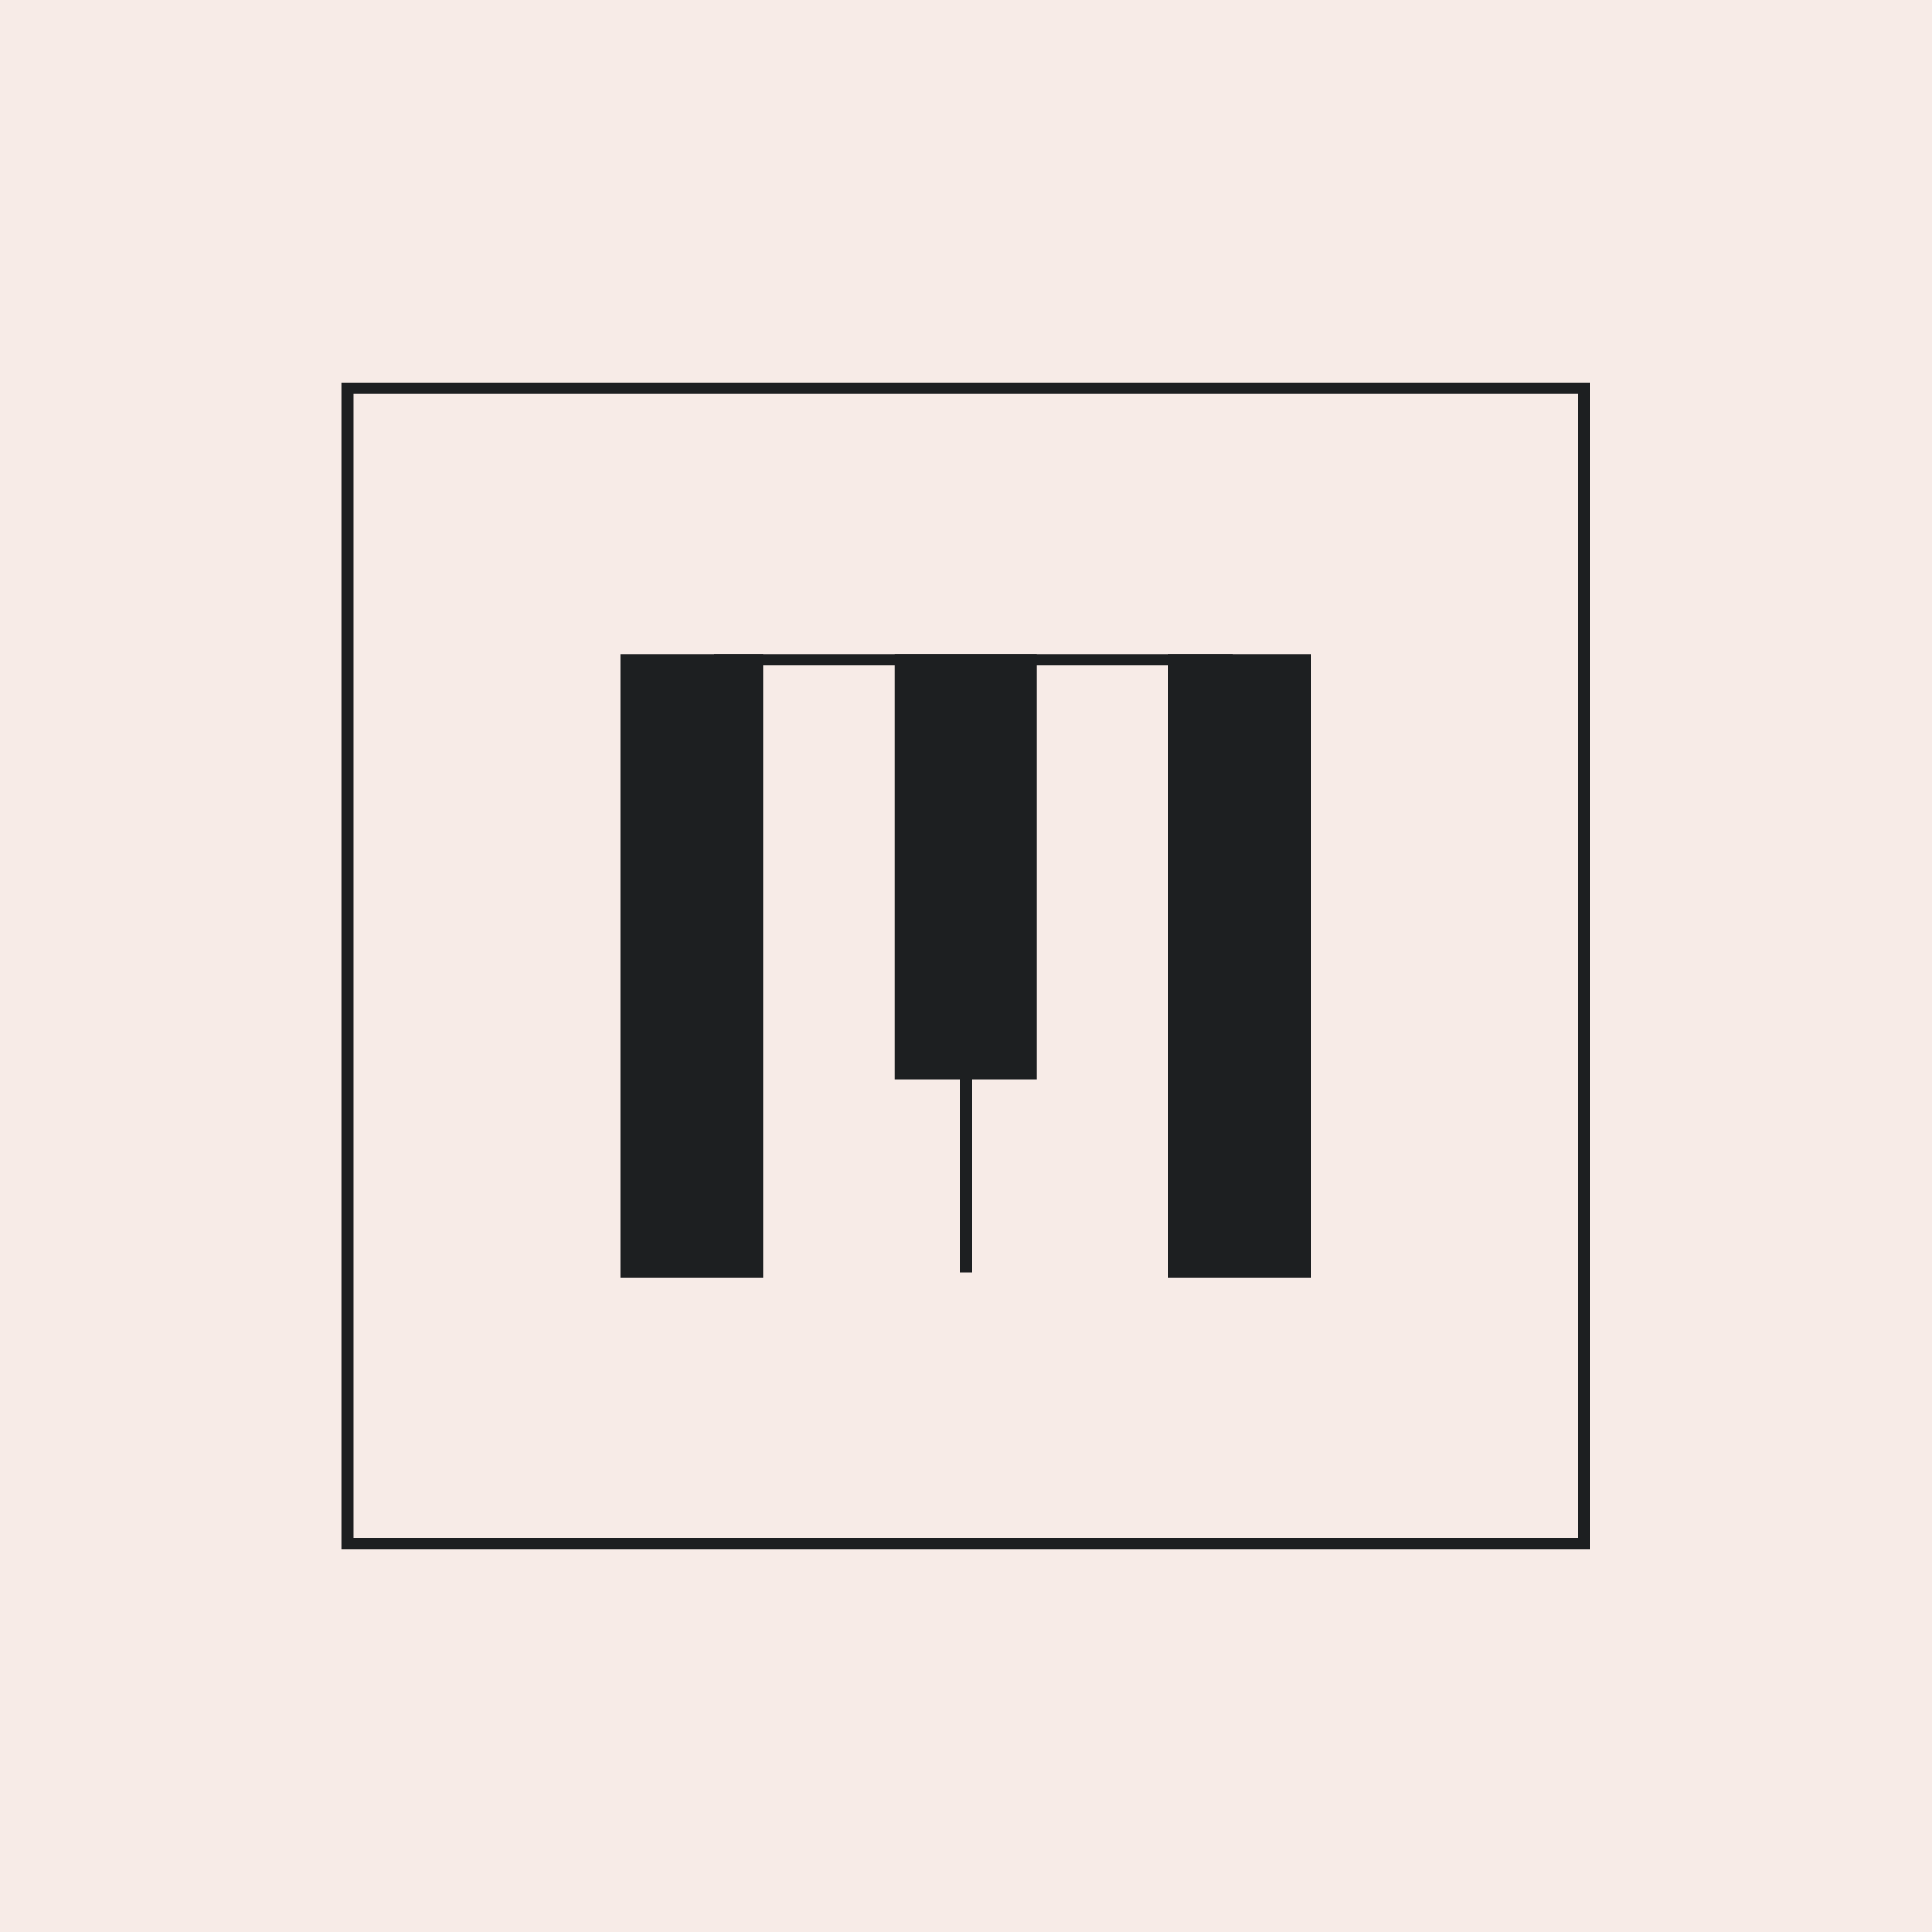 A black M that resembles piano keys on a cream background surrounded by a box